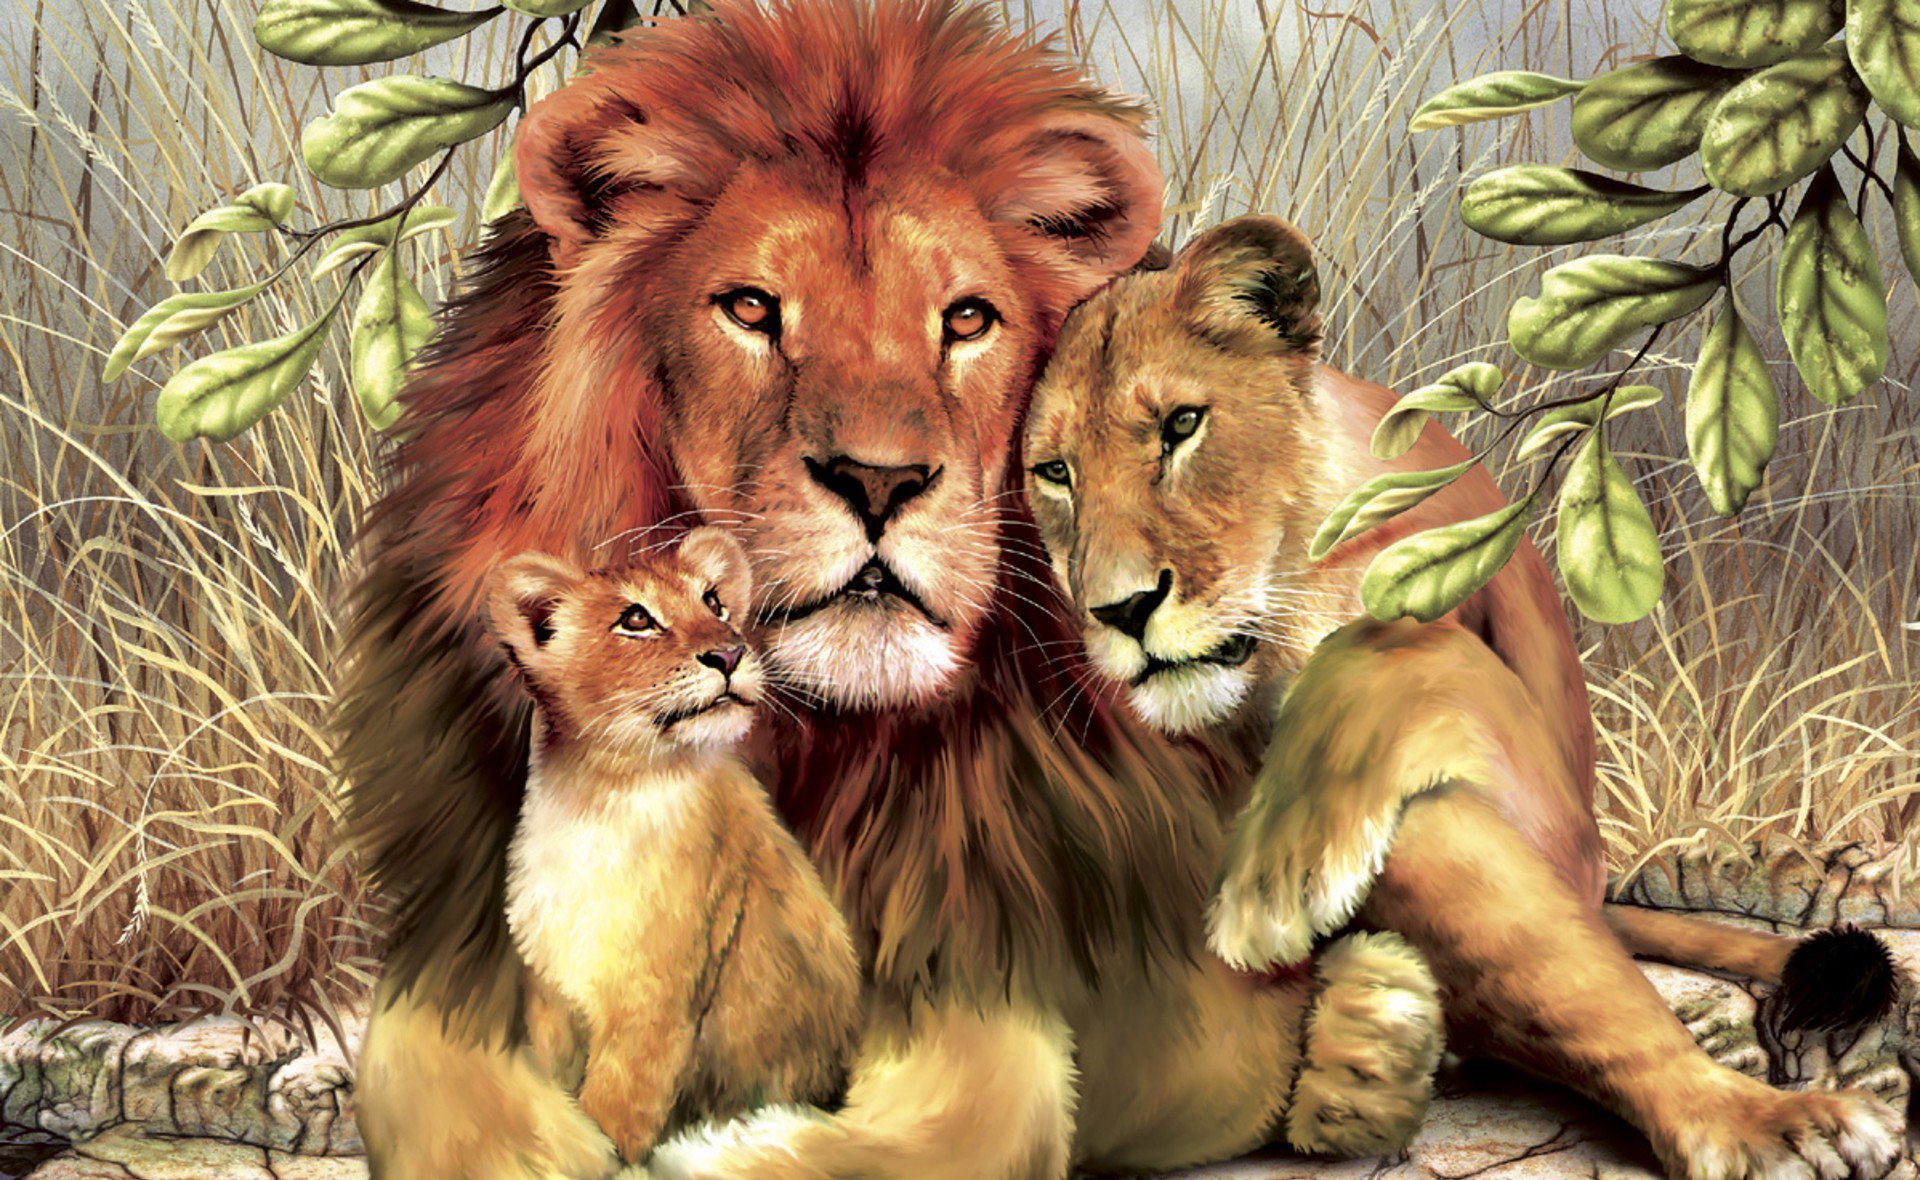 big, Cats, Lions, Painting, Art, Three, 3, Animals, Lion Wallpapers HD